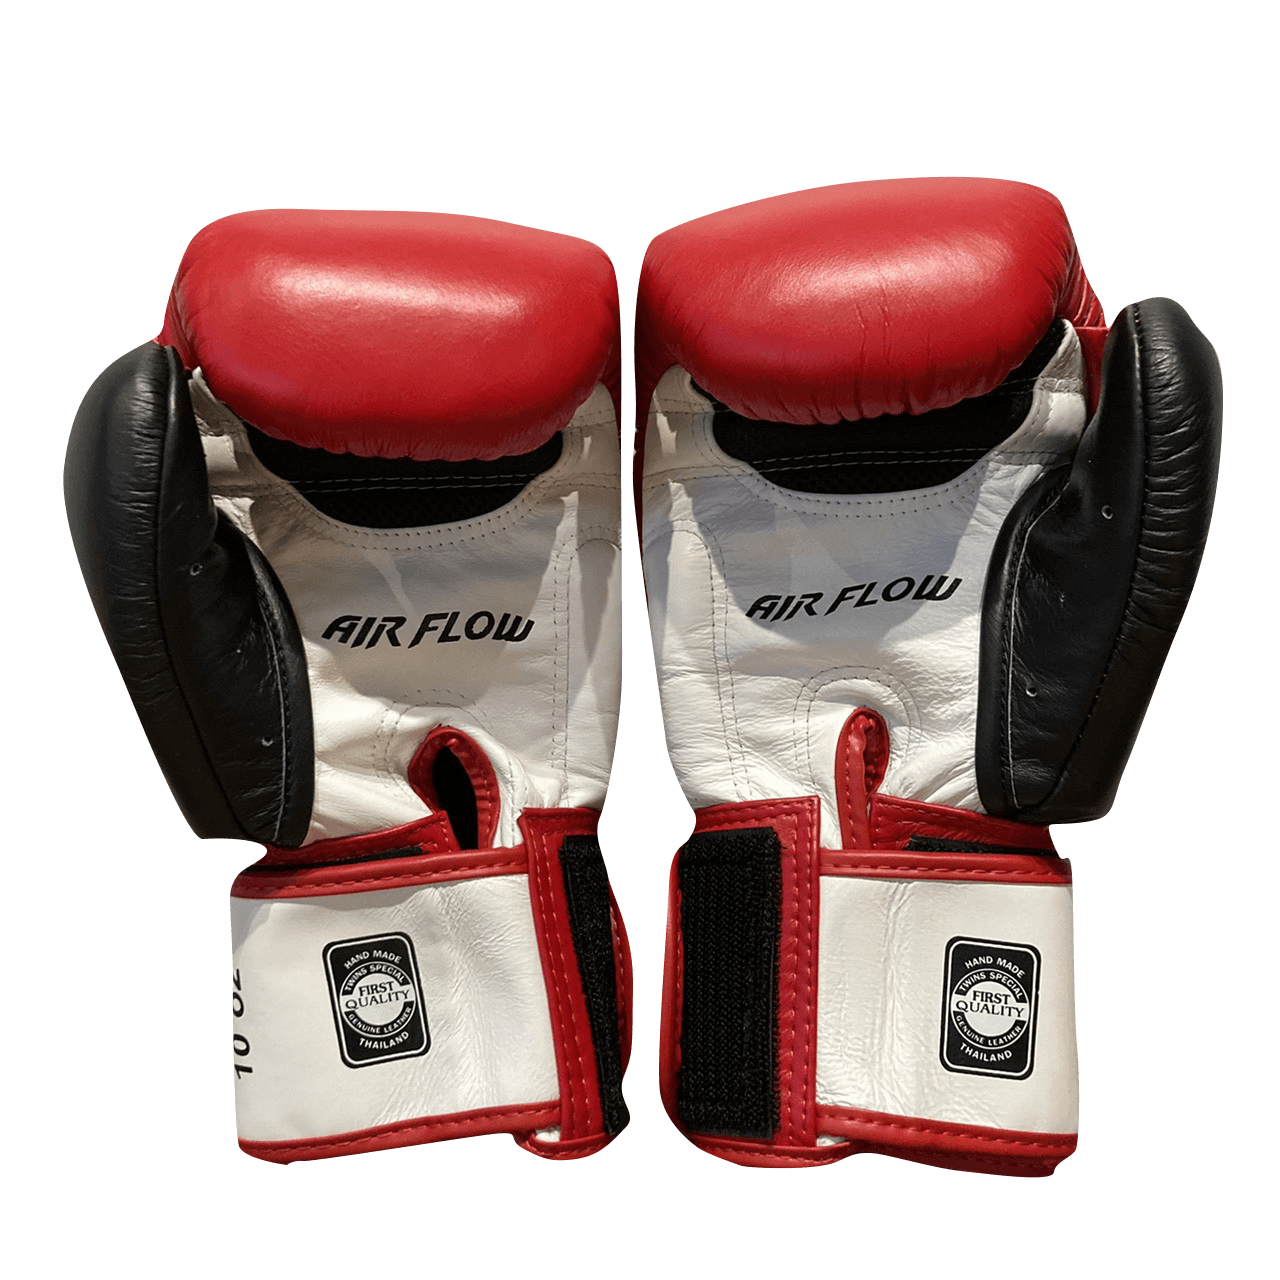 Twins Special Boxing Gloves BGVLA-3T Wh/Rd/Bk/Bk Red Front Twins Special